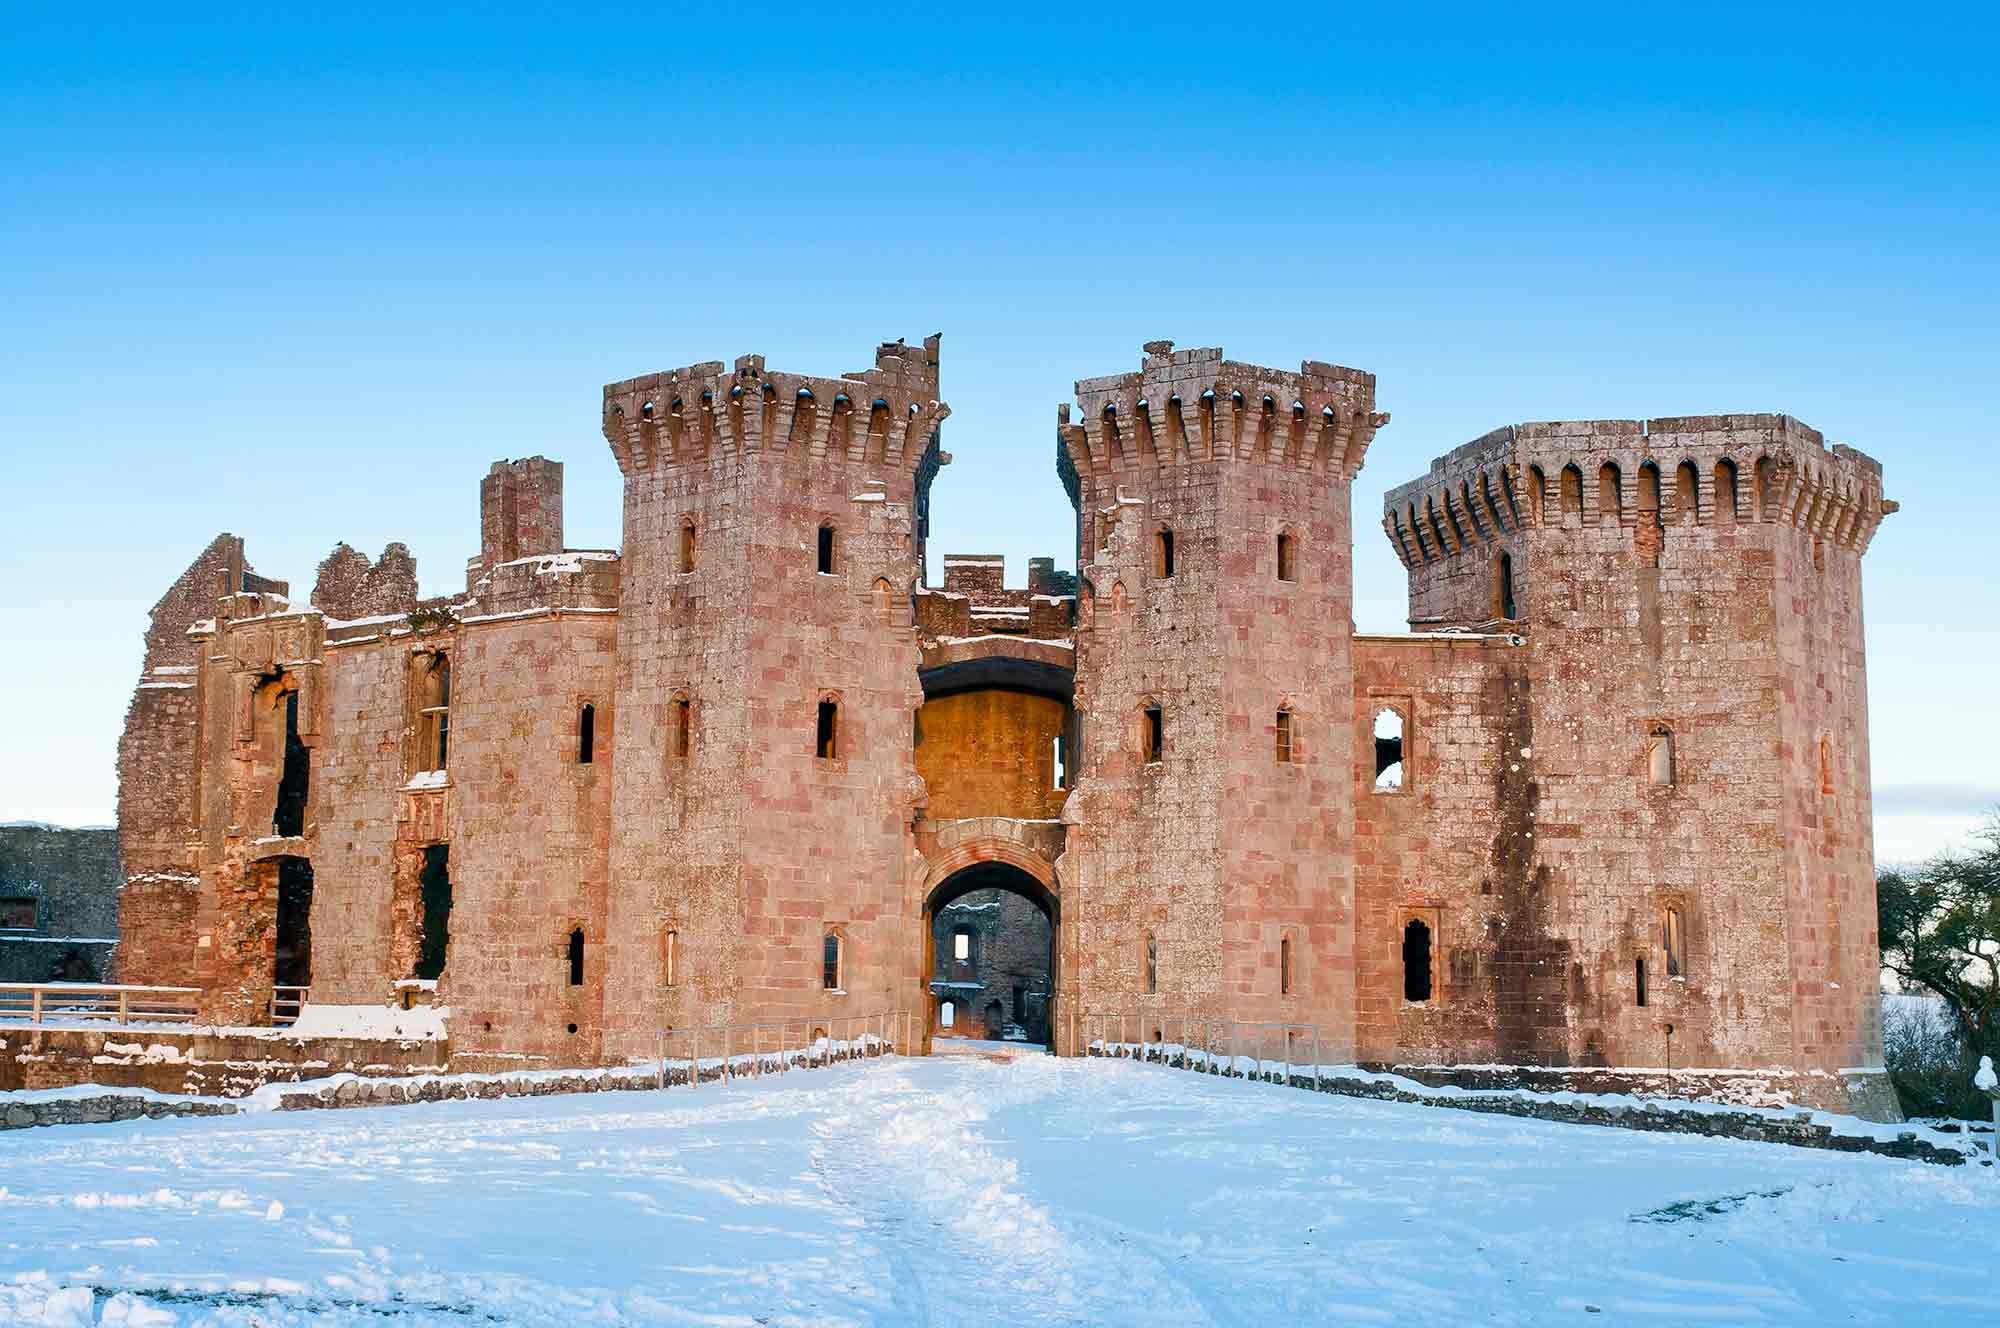 Entrance to castle with snow in the foreground